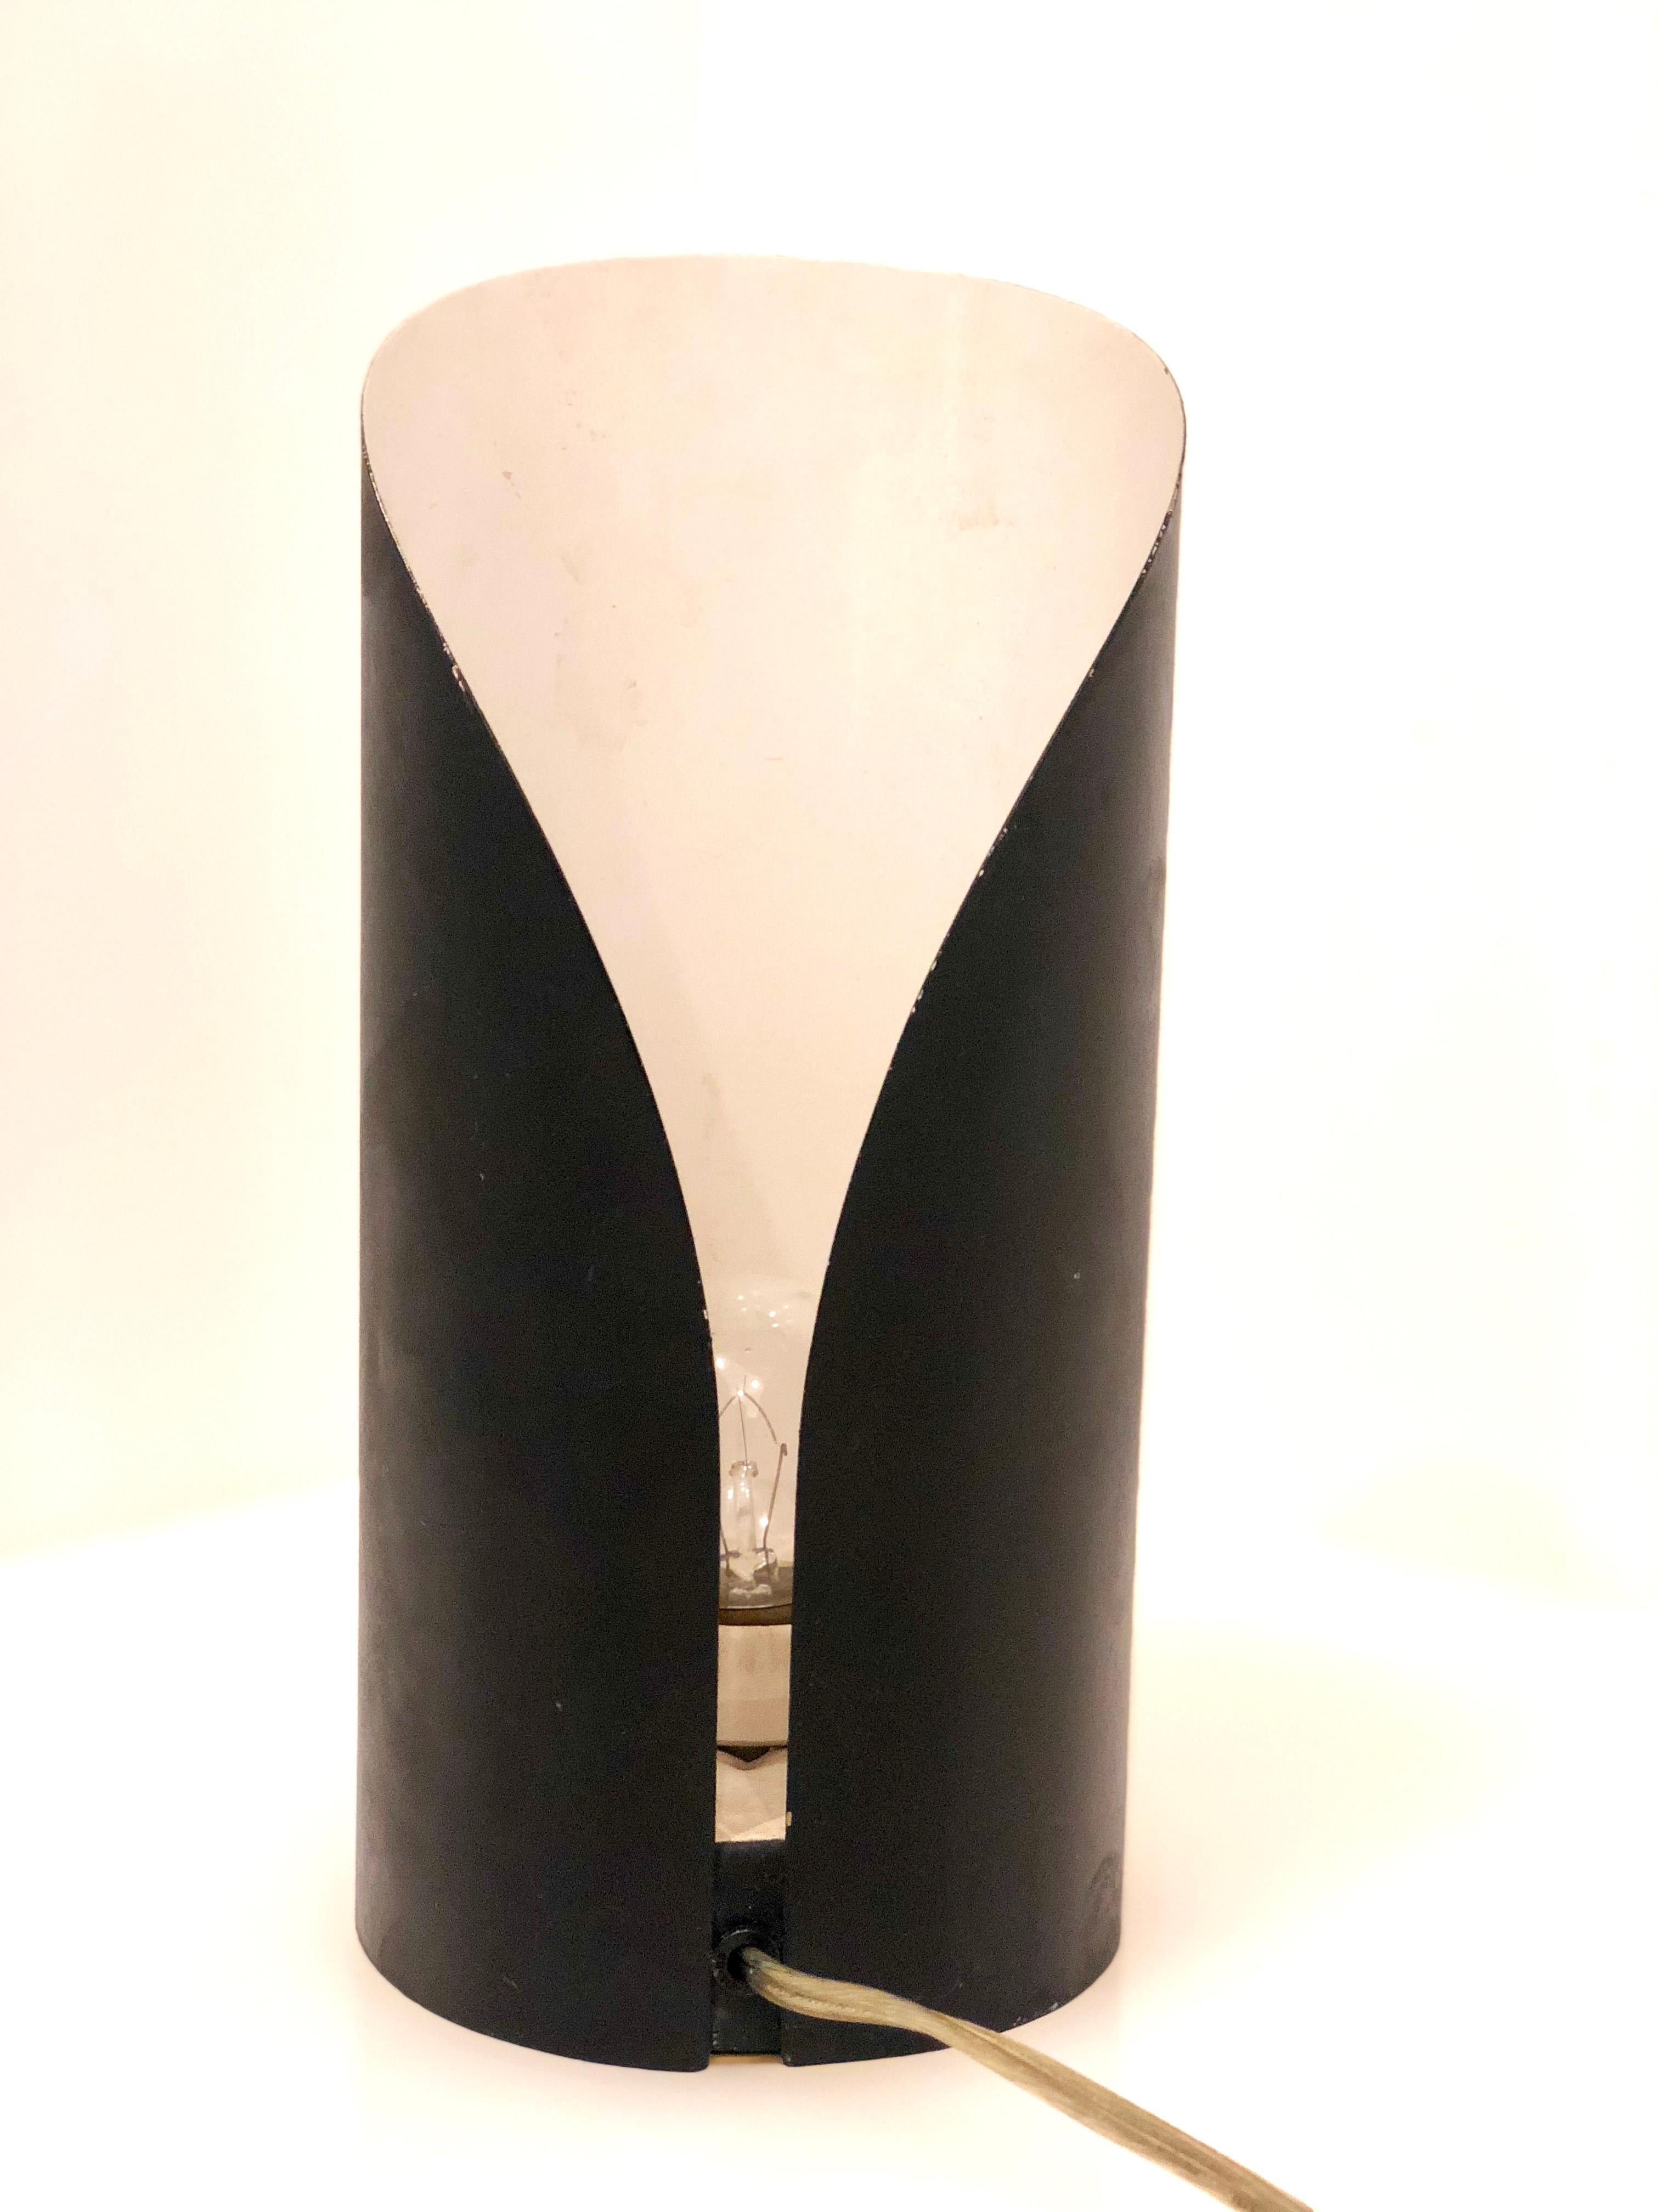 American Mid-Century Modern Tuxedo Desk/Table Lamp In Good Condition In San Diego, CA